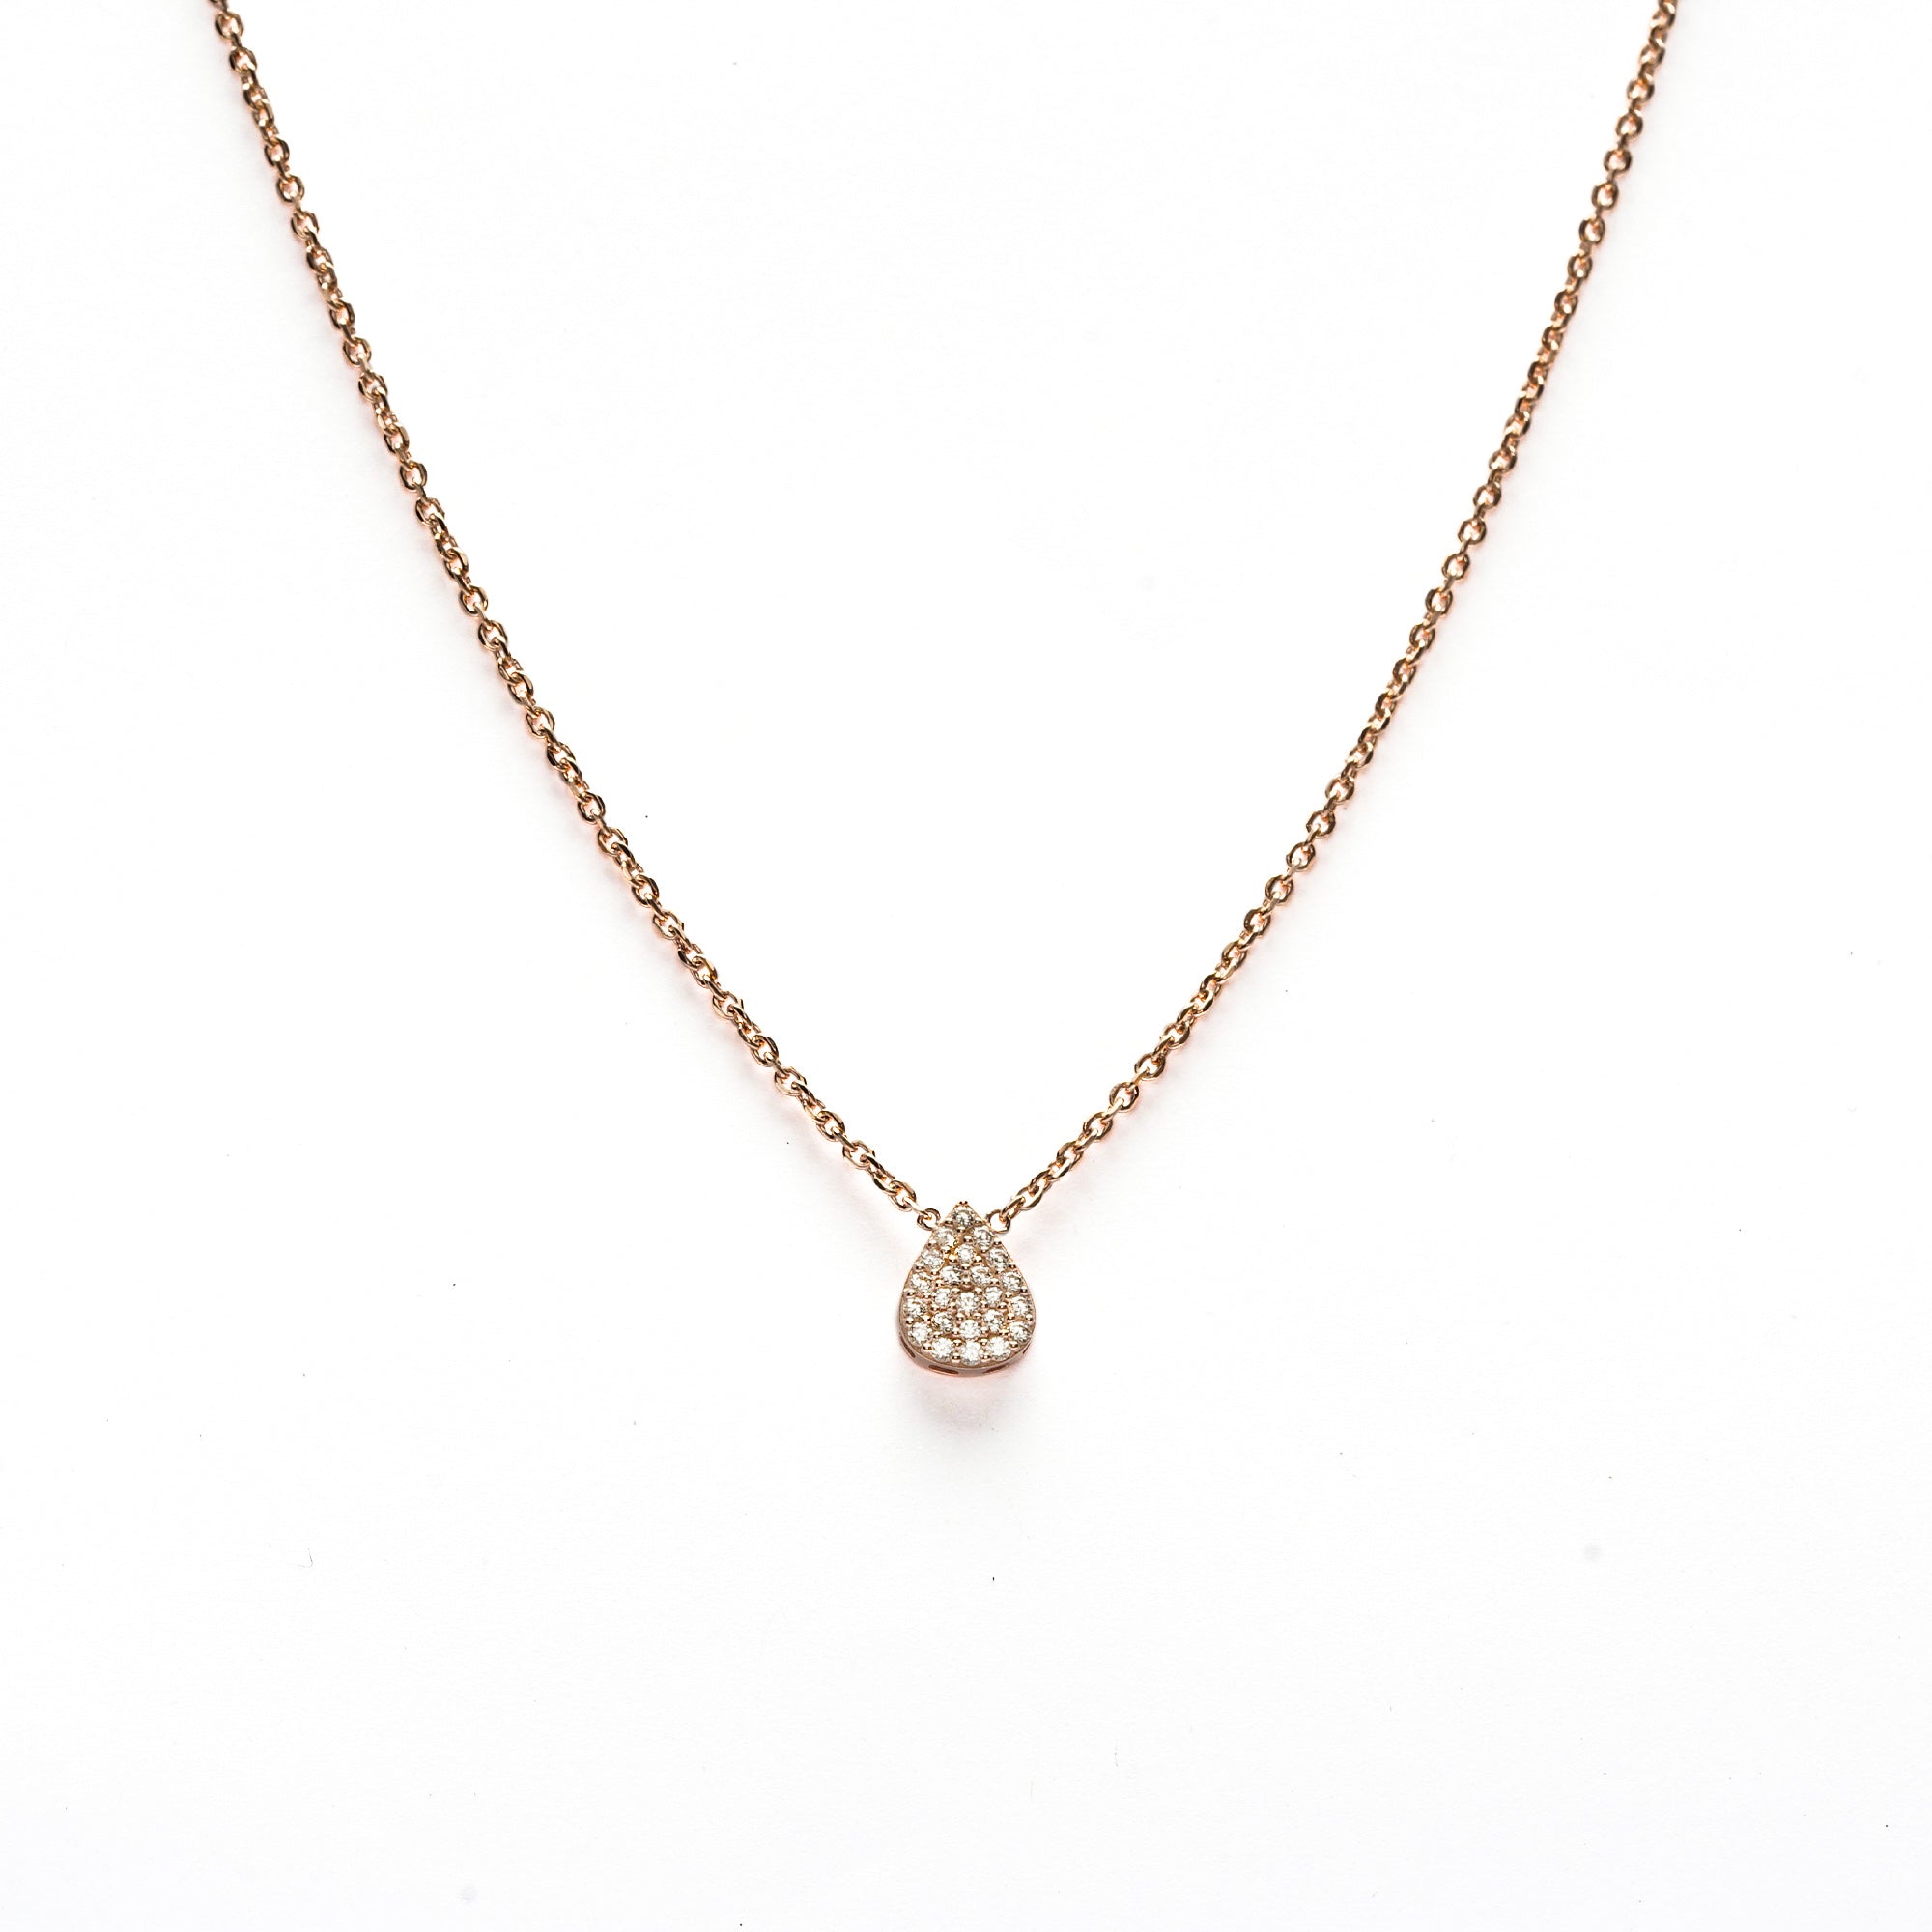 Fiolla Gold Necklace - Radiance - Juene Jewelry